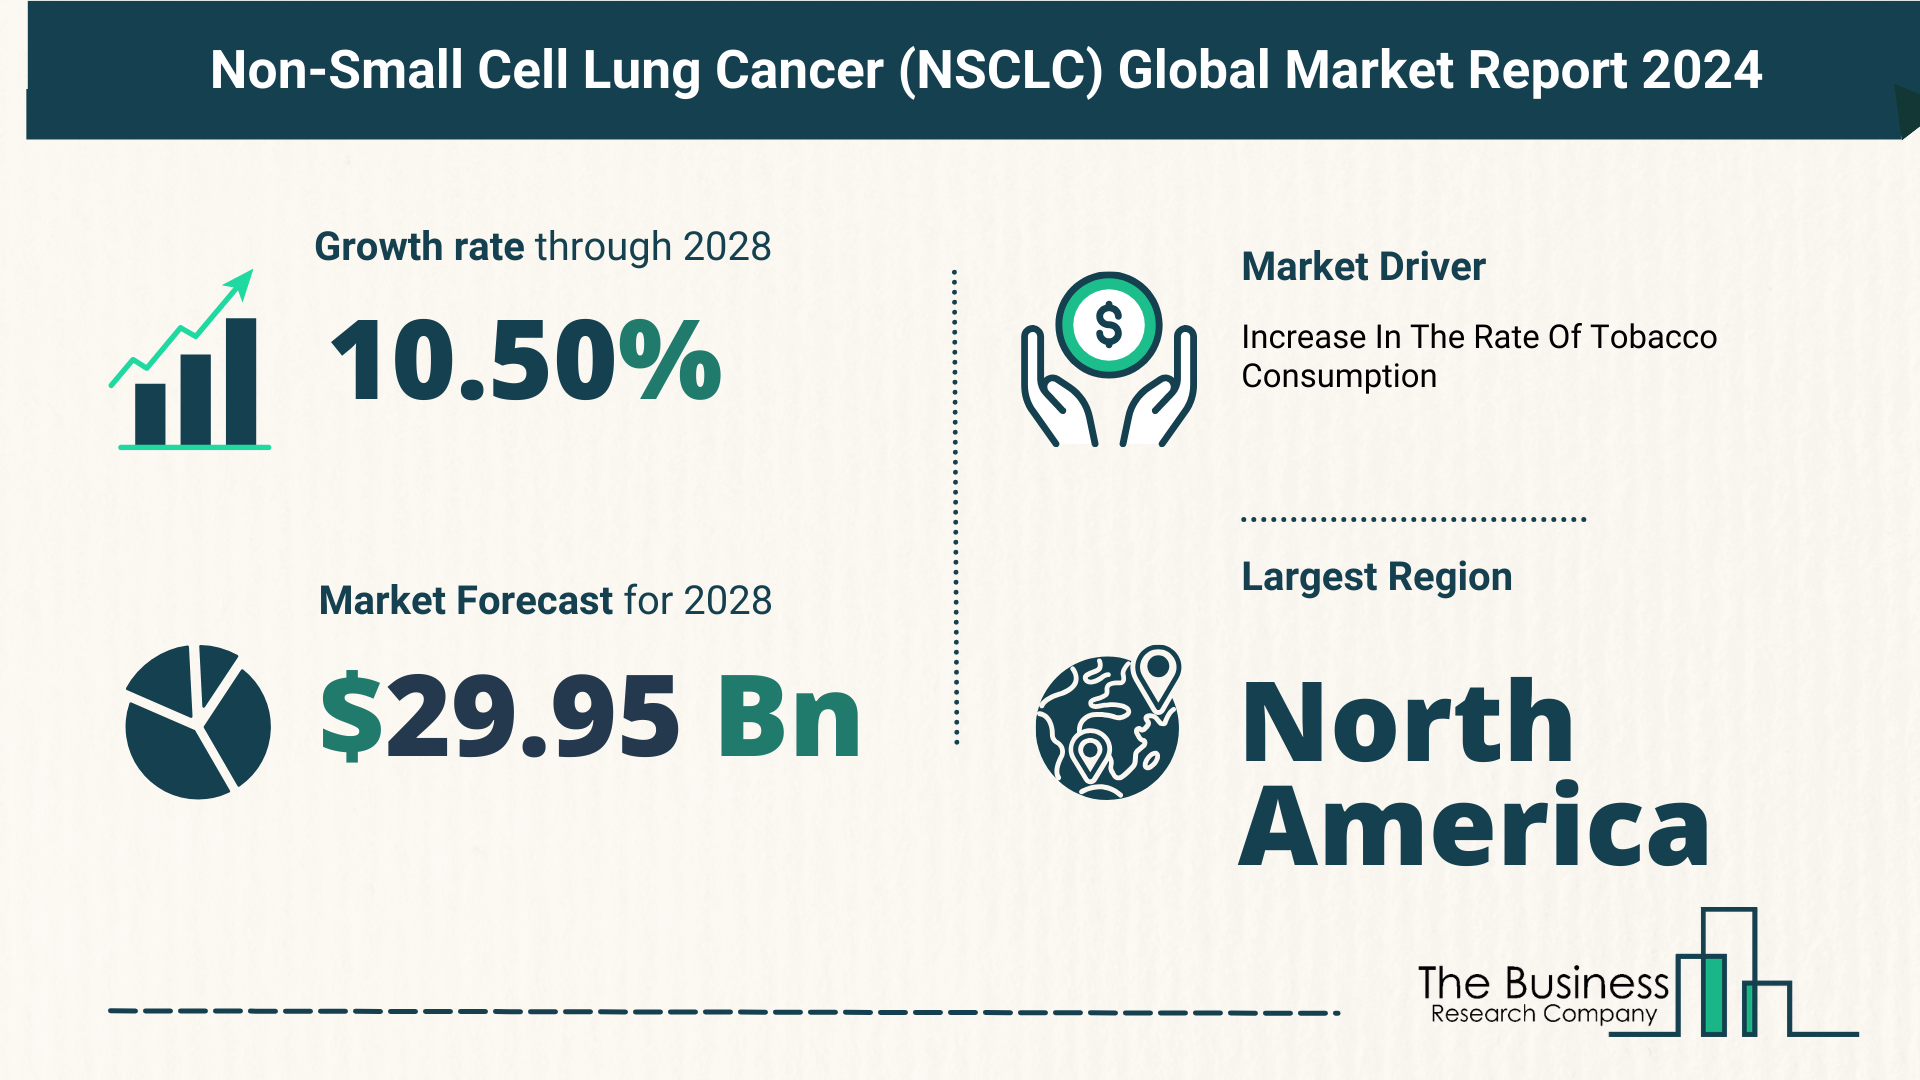 Global Non-Small Cell Lung Cancer (NSCLC) Market